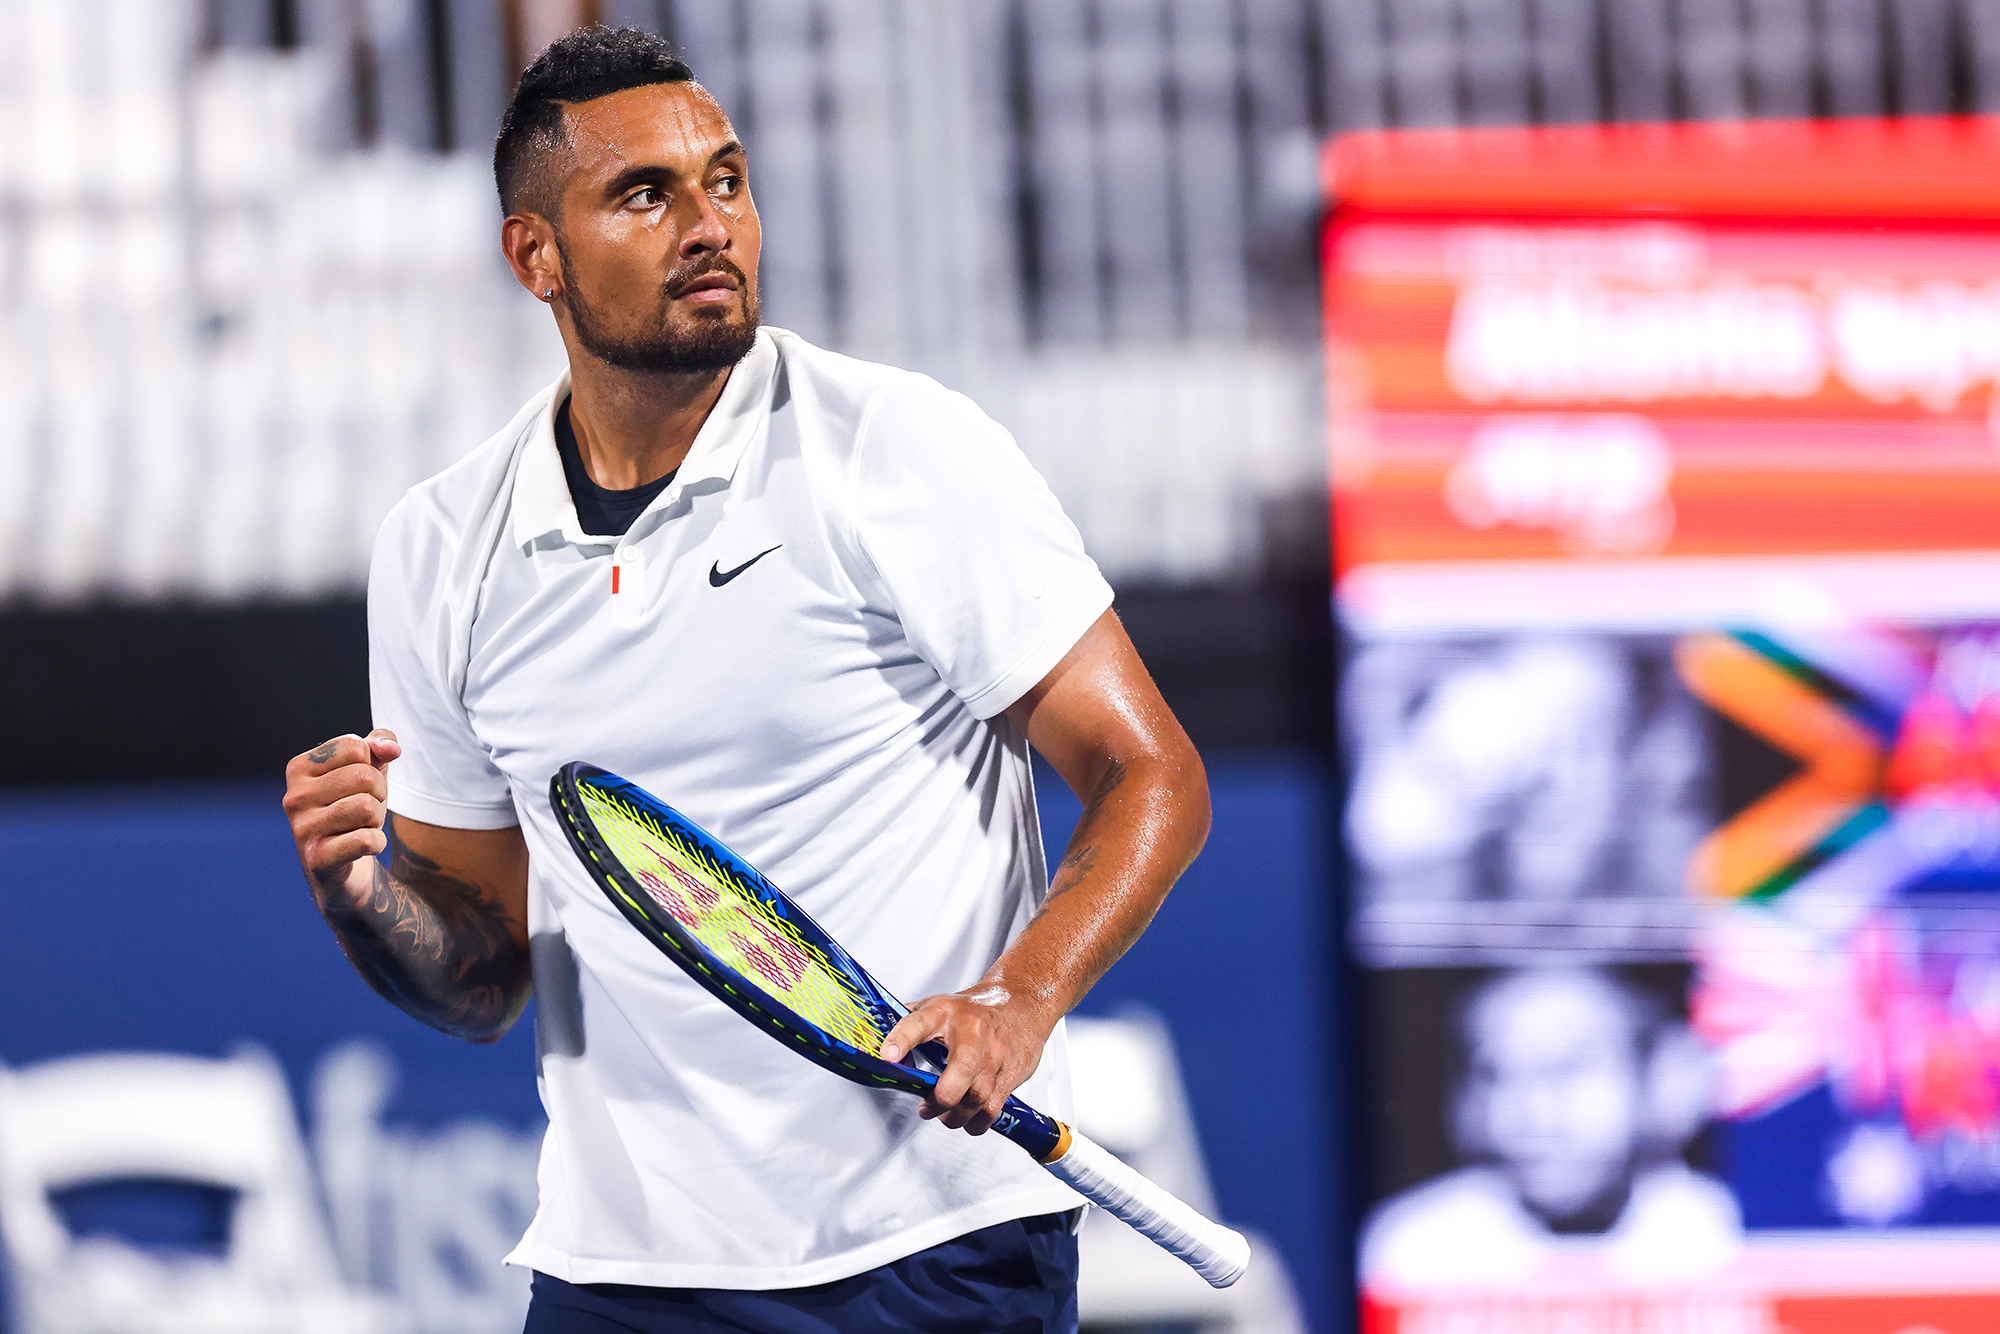 Nick Kyrgios of Australia reacts during a match against Kevin Anderson of South Africa at the Truist Atlanta Open at Atlantic Station on July 27, 2021 in Atlanta, Georgia. 